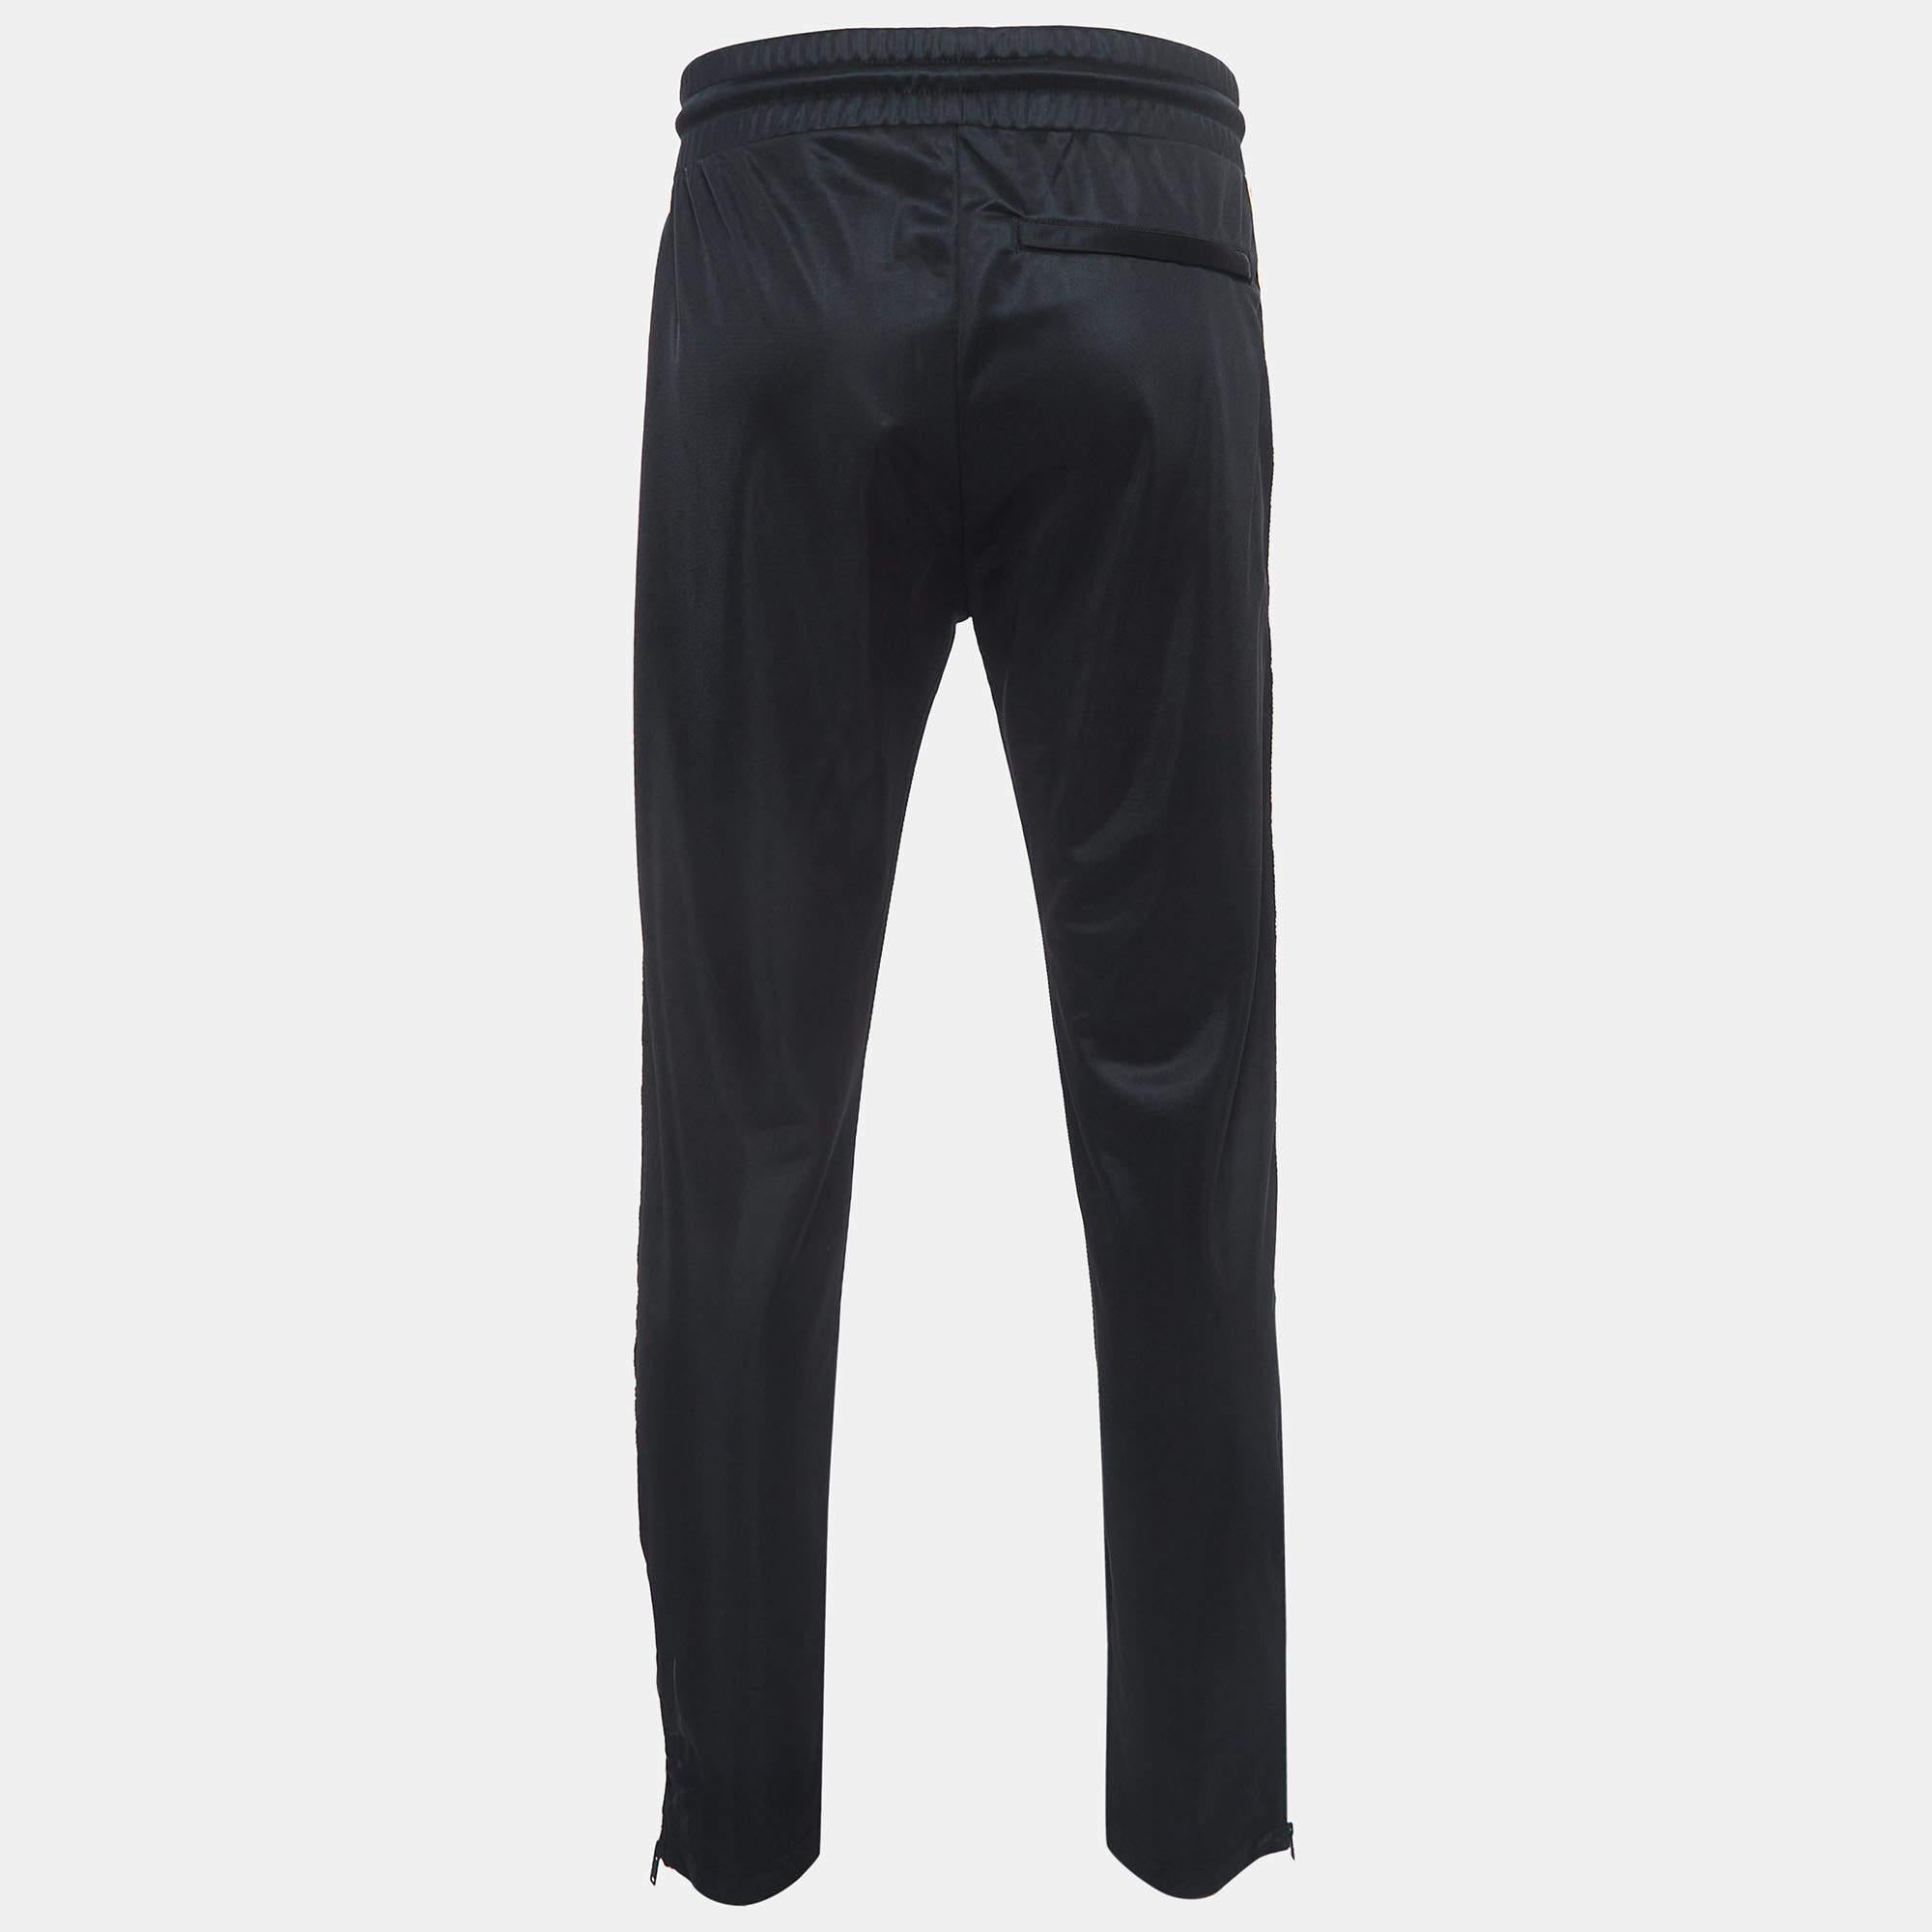 Impeccably tailored pants are a staple in a well-curated wardrobe. These designer pants are finely sewn to give you the desired look and all-day comfort.

Includes: Price Tag